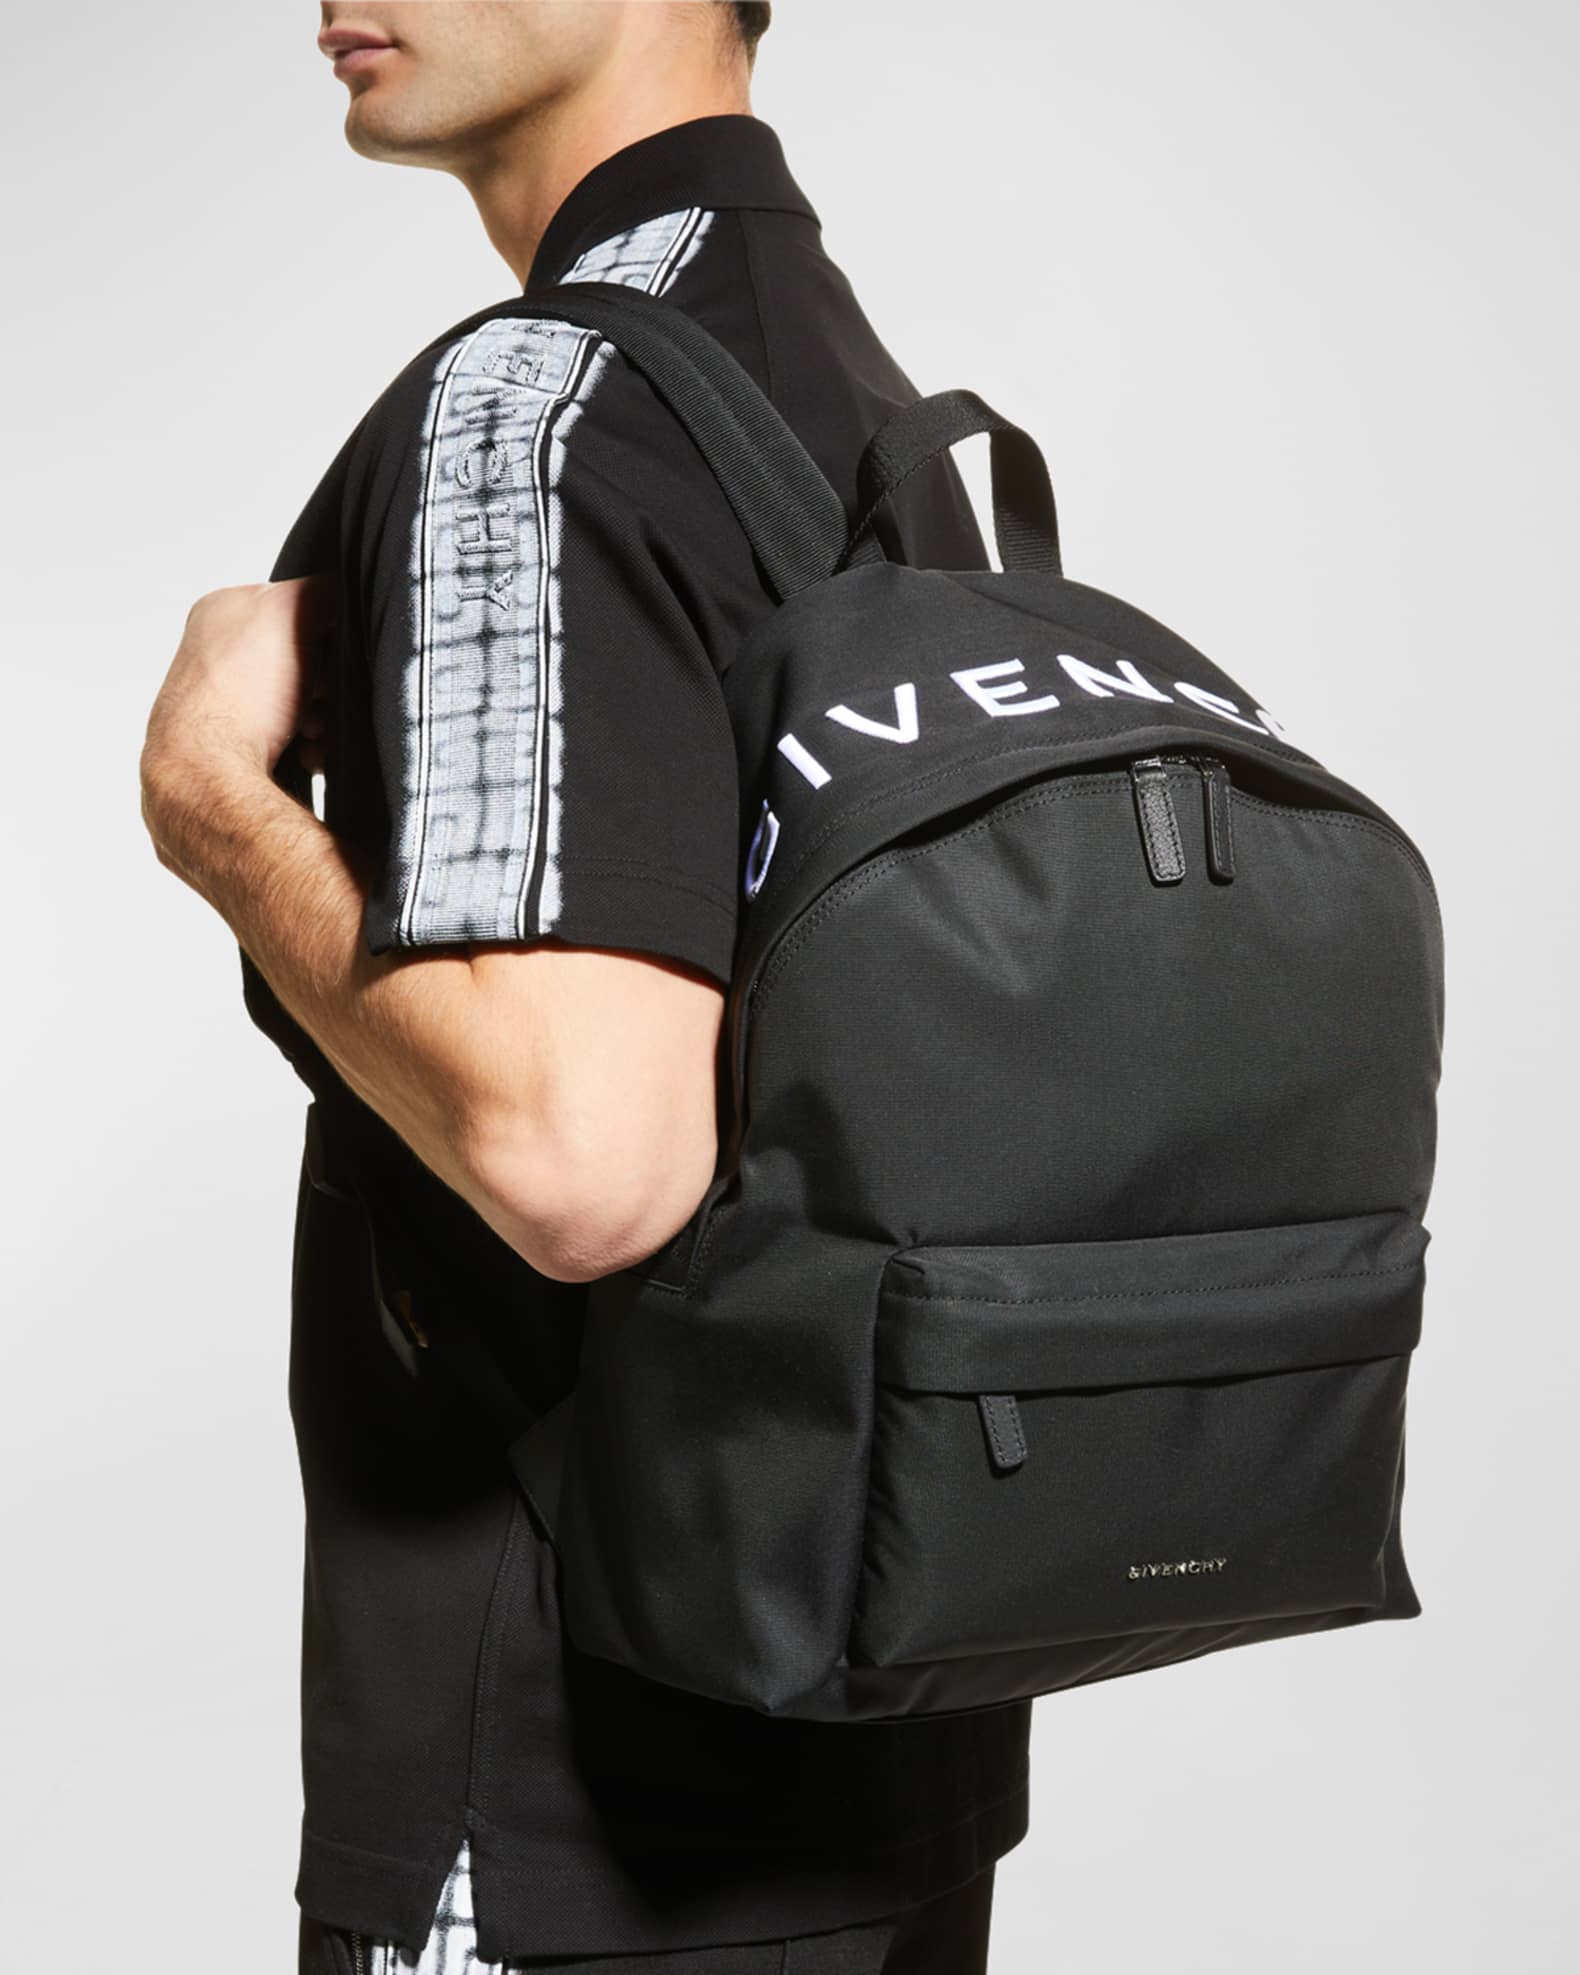 Givenchy Men's Essential U Logo Backpack | Neiman Marcus